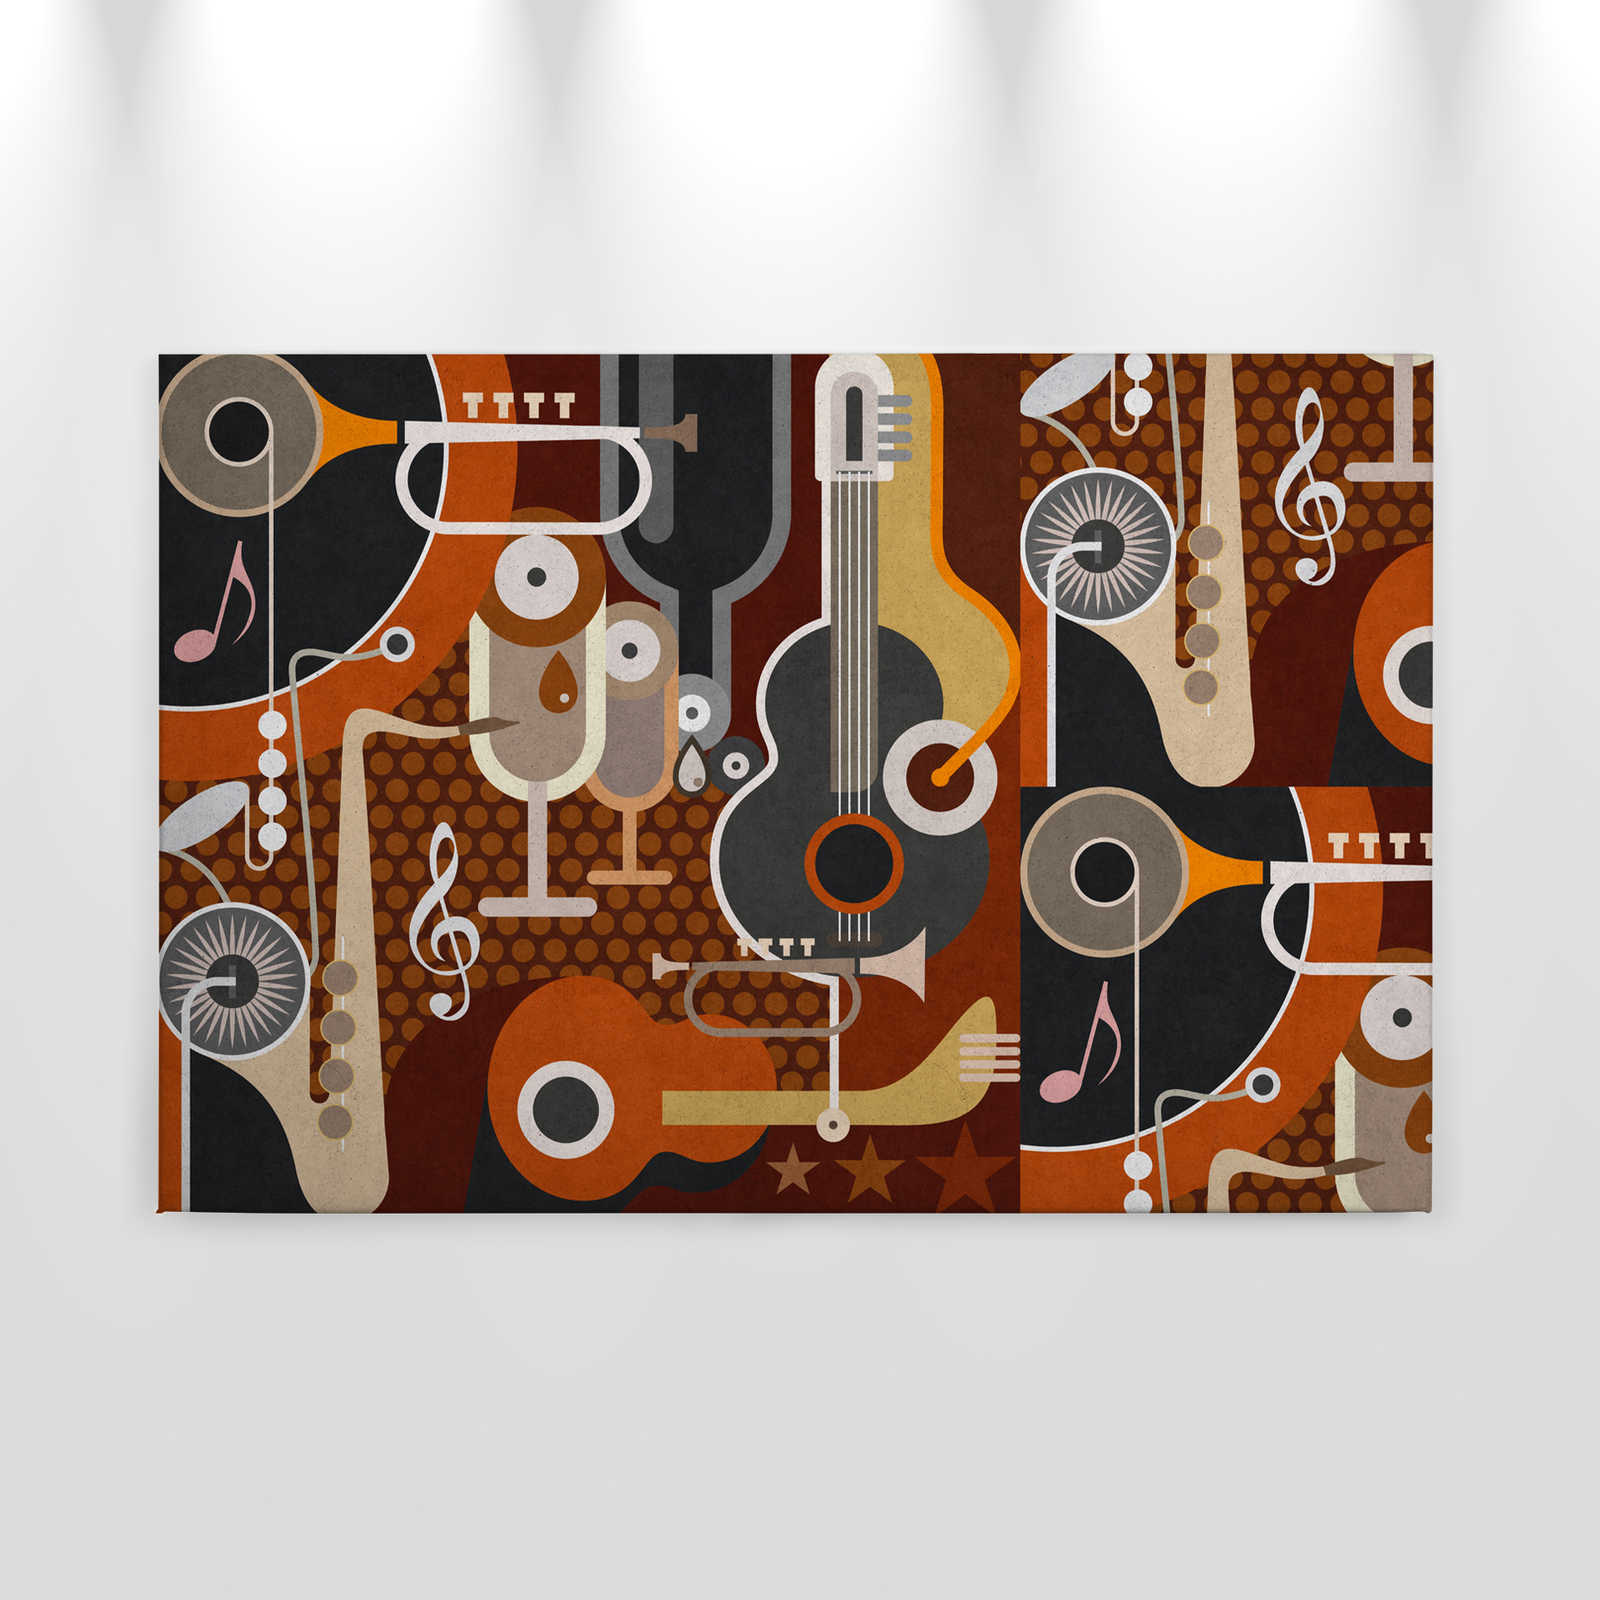             Wall of sound 1 - Canvas painting in concrete structure, abstract musical instruments - 0.90 m x 0.60 m
        